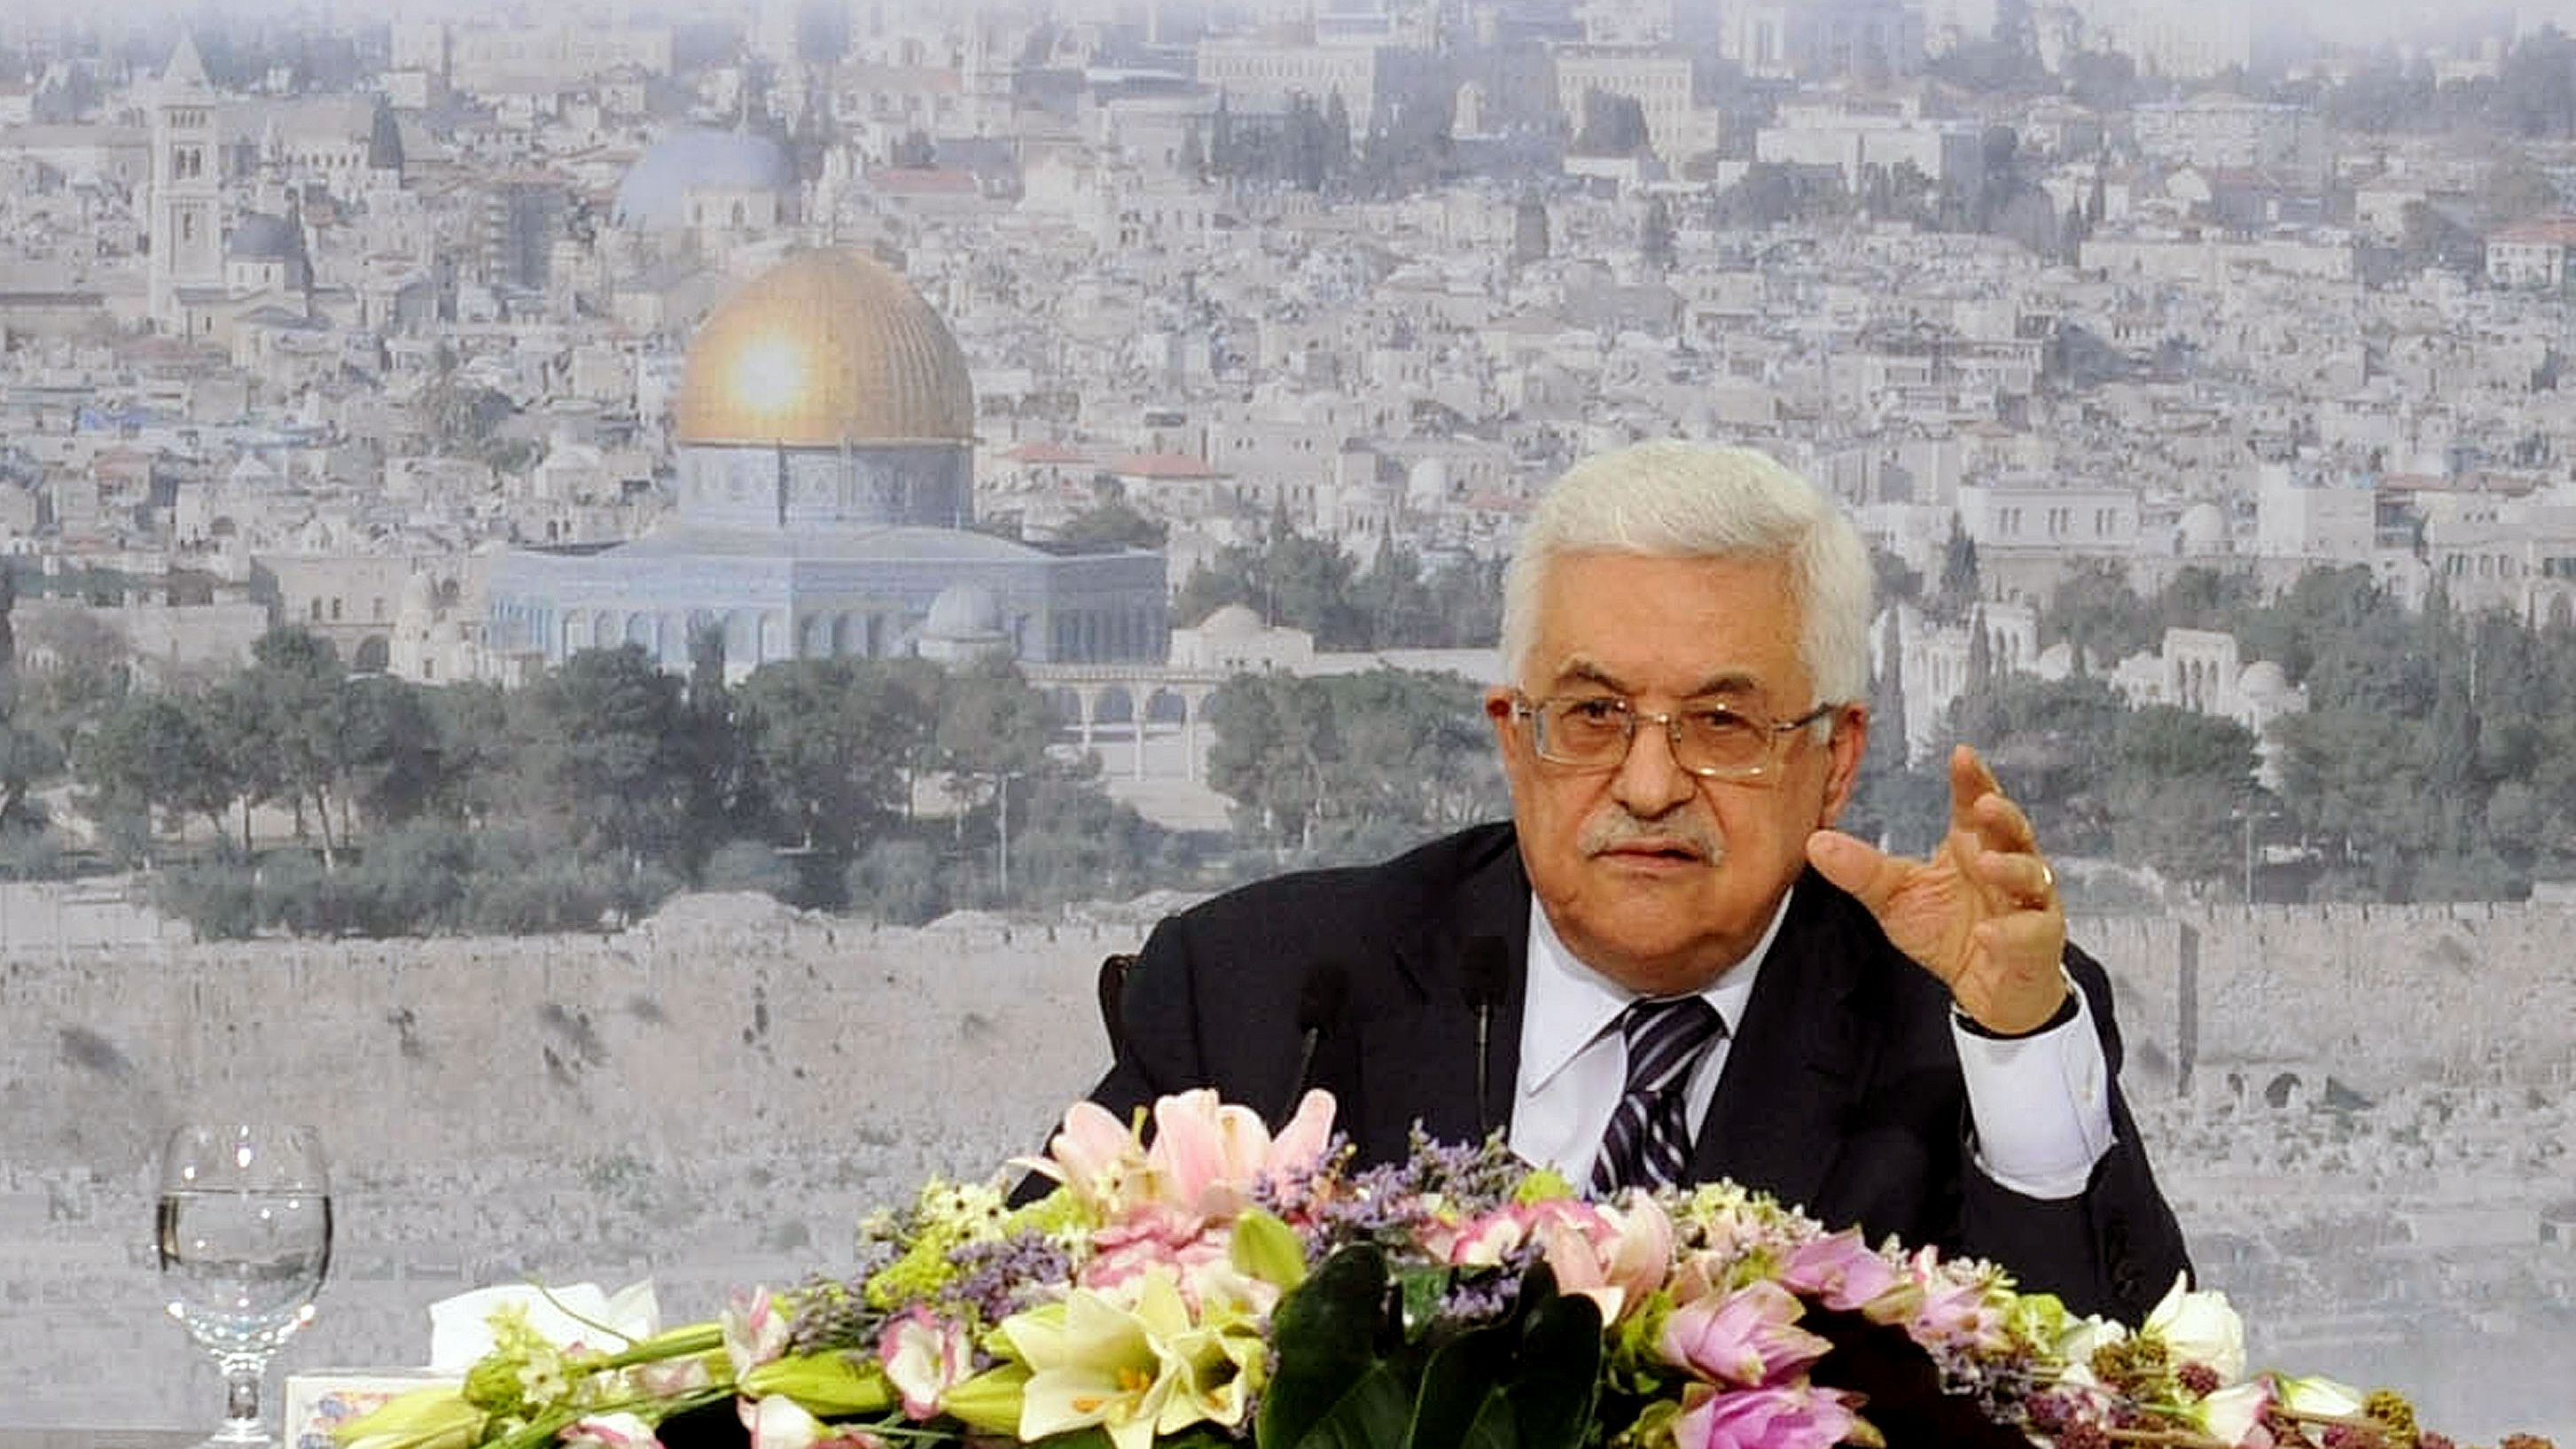 U.S. President Obama will meet with Palestinian President Mahmoud Abbas, pictured, on Wednesday.